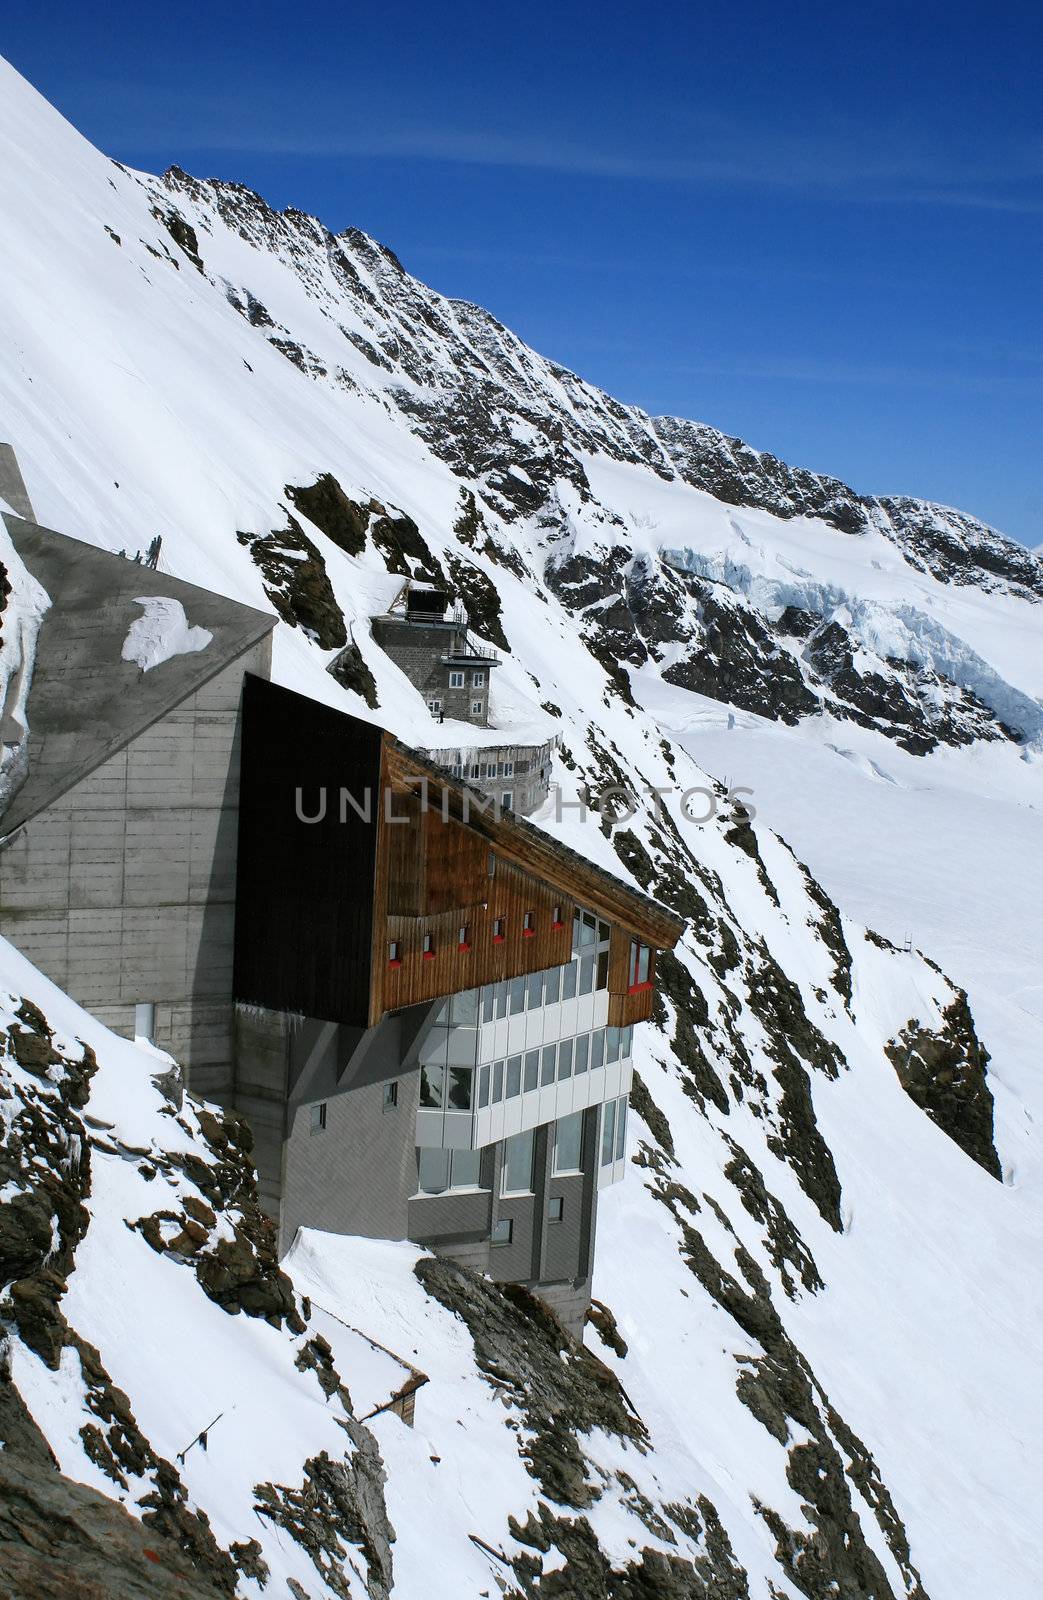 Jungfrau - top of the Europe by swisshippo